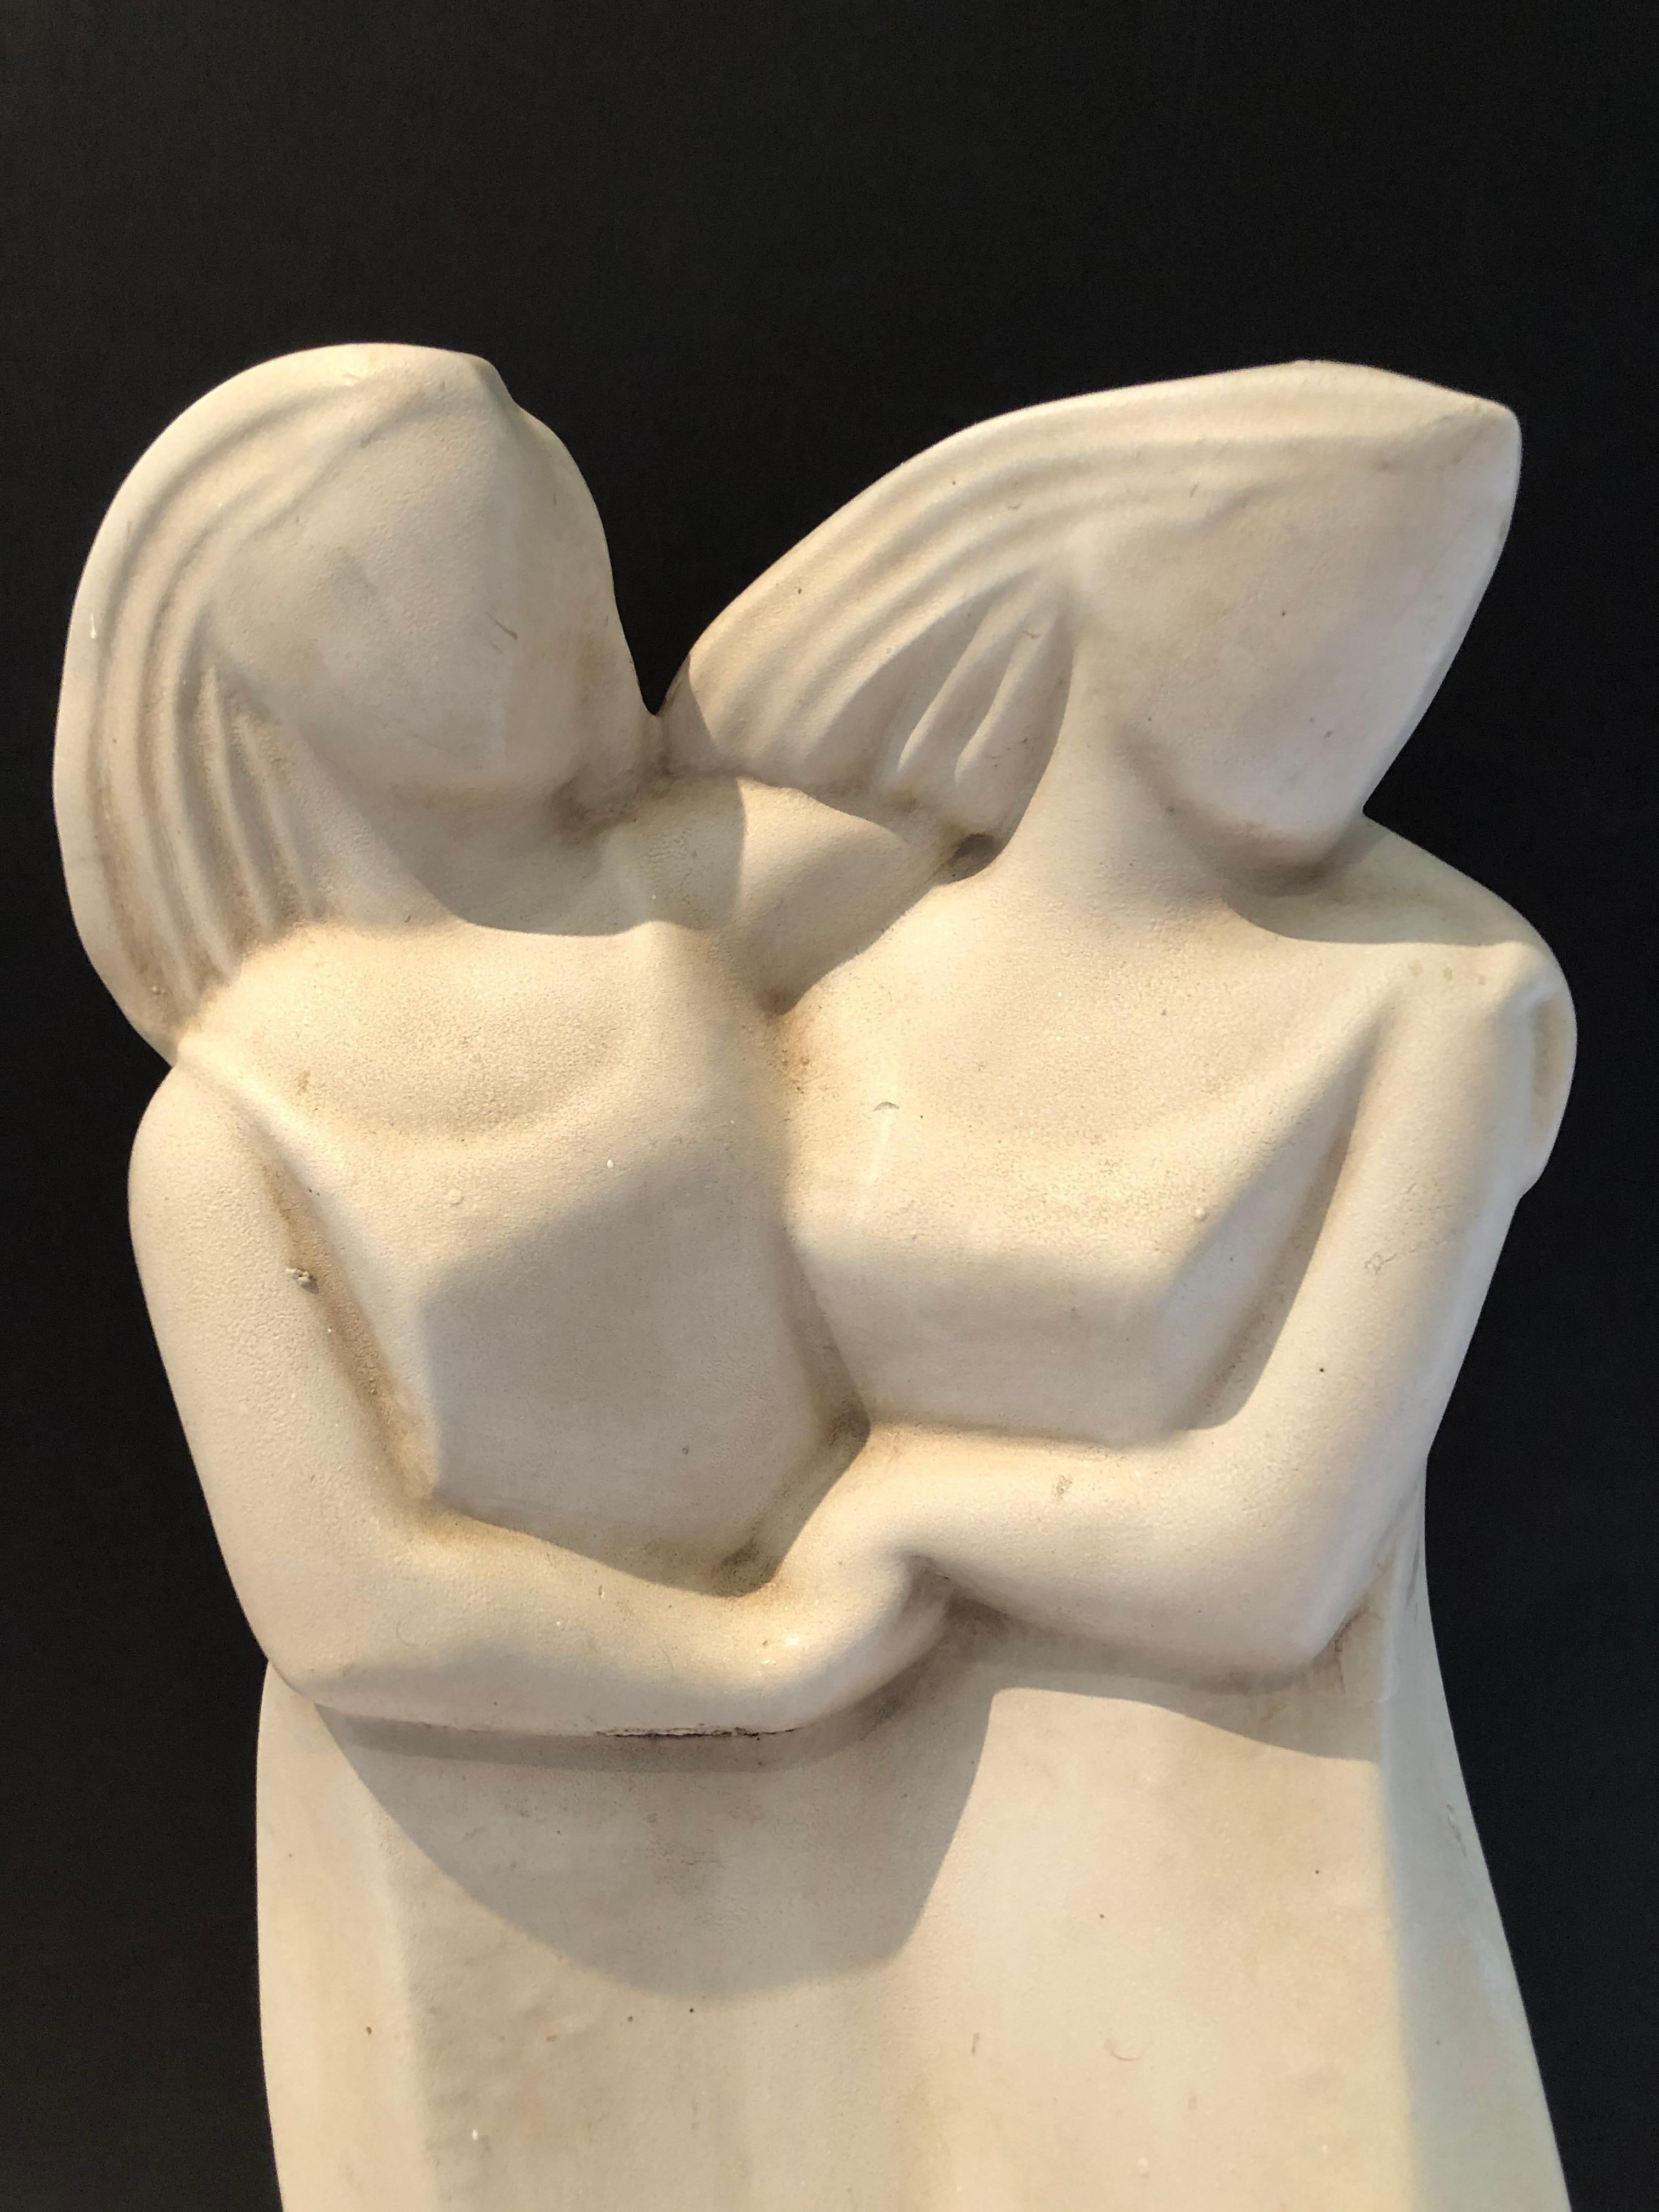 A gorgeous vintage abstract Art Deco style plaster sculpture of two women lovingly holding hands and in an affectionate position, one arm sweetly around the other's shoulders and waist. The art is beautiful from every angle and striking in its